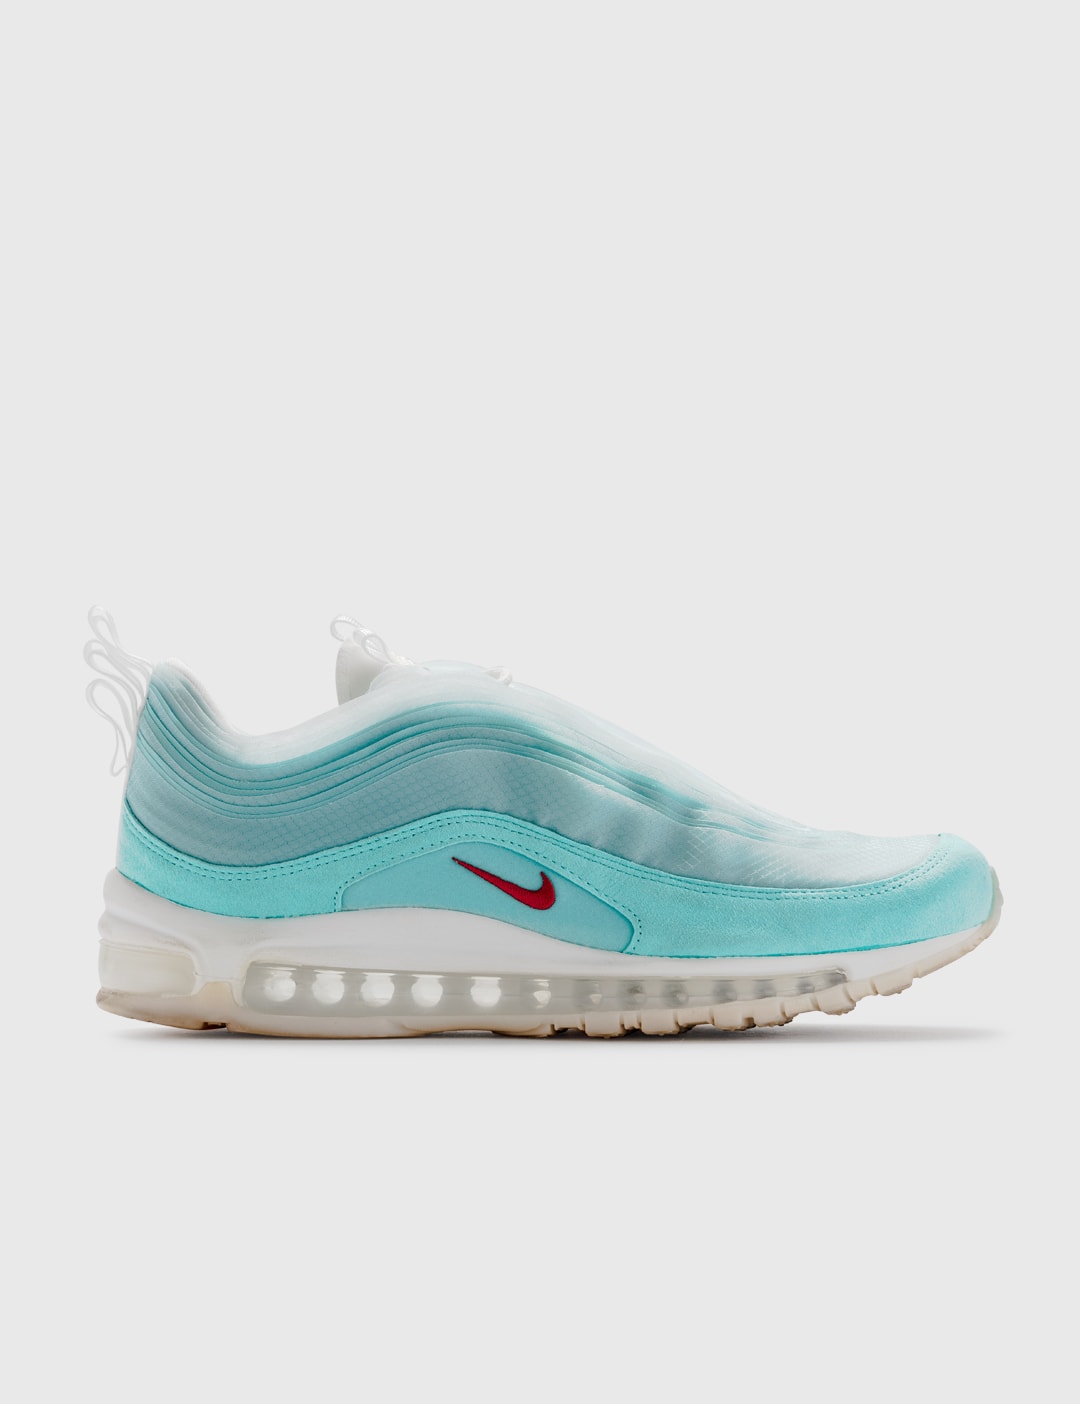 Dependiente Implacable Arrepentimiento Nike - Nike Air Max 97 sneakers “Shanghai Kaleidoscope” | HBX - Globally  Curated Fashion and Lifestyle by Hypebeast